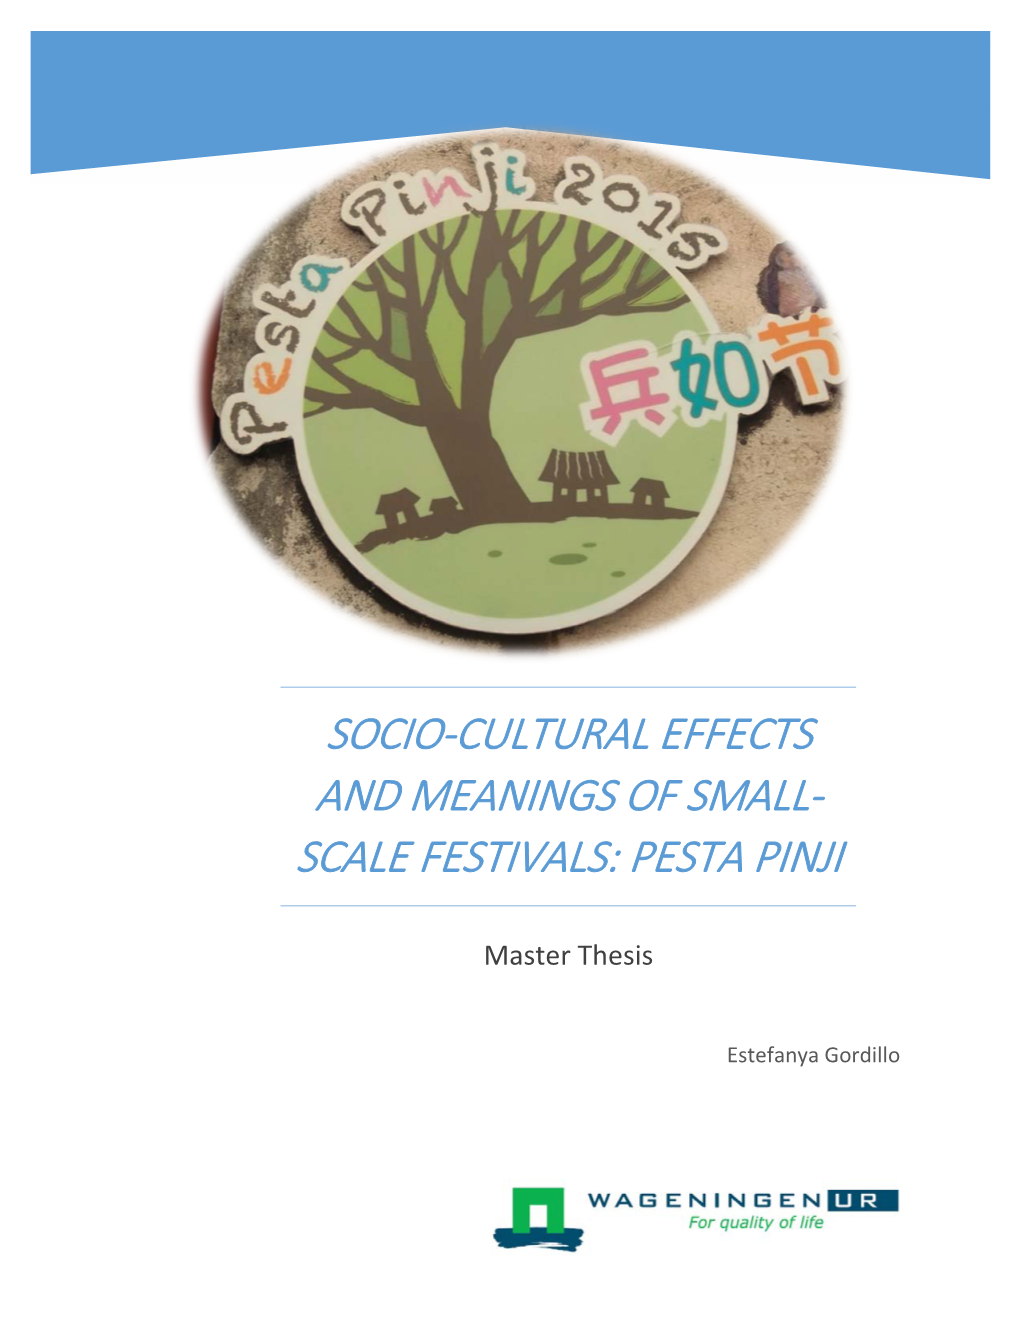 Socio-Cultural Effects and Meanings of Small-Scale Festivals: Pesta Pinji